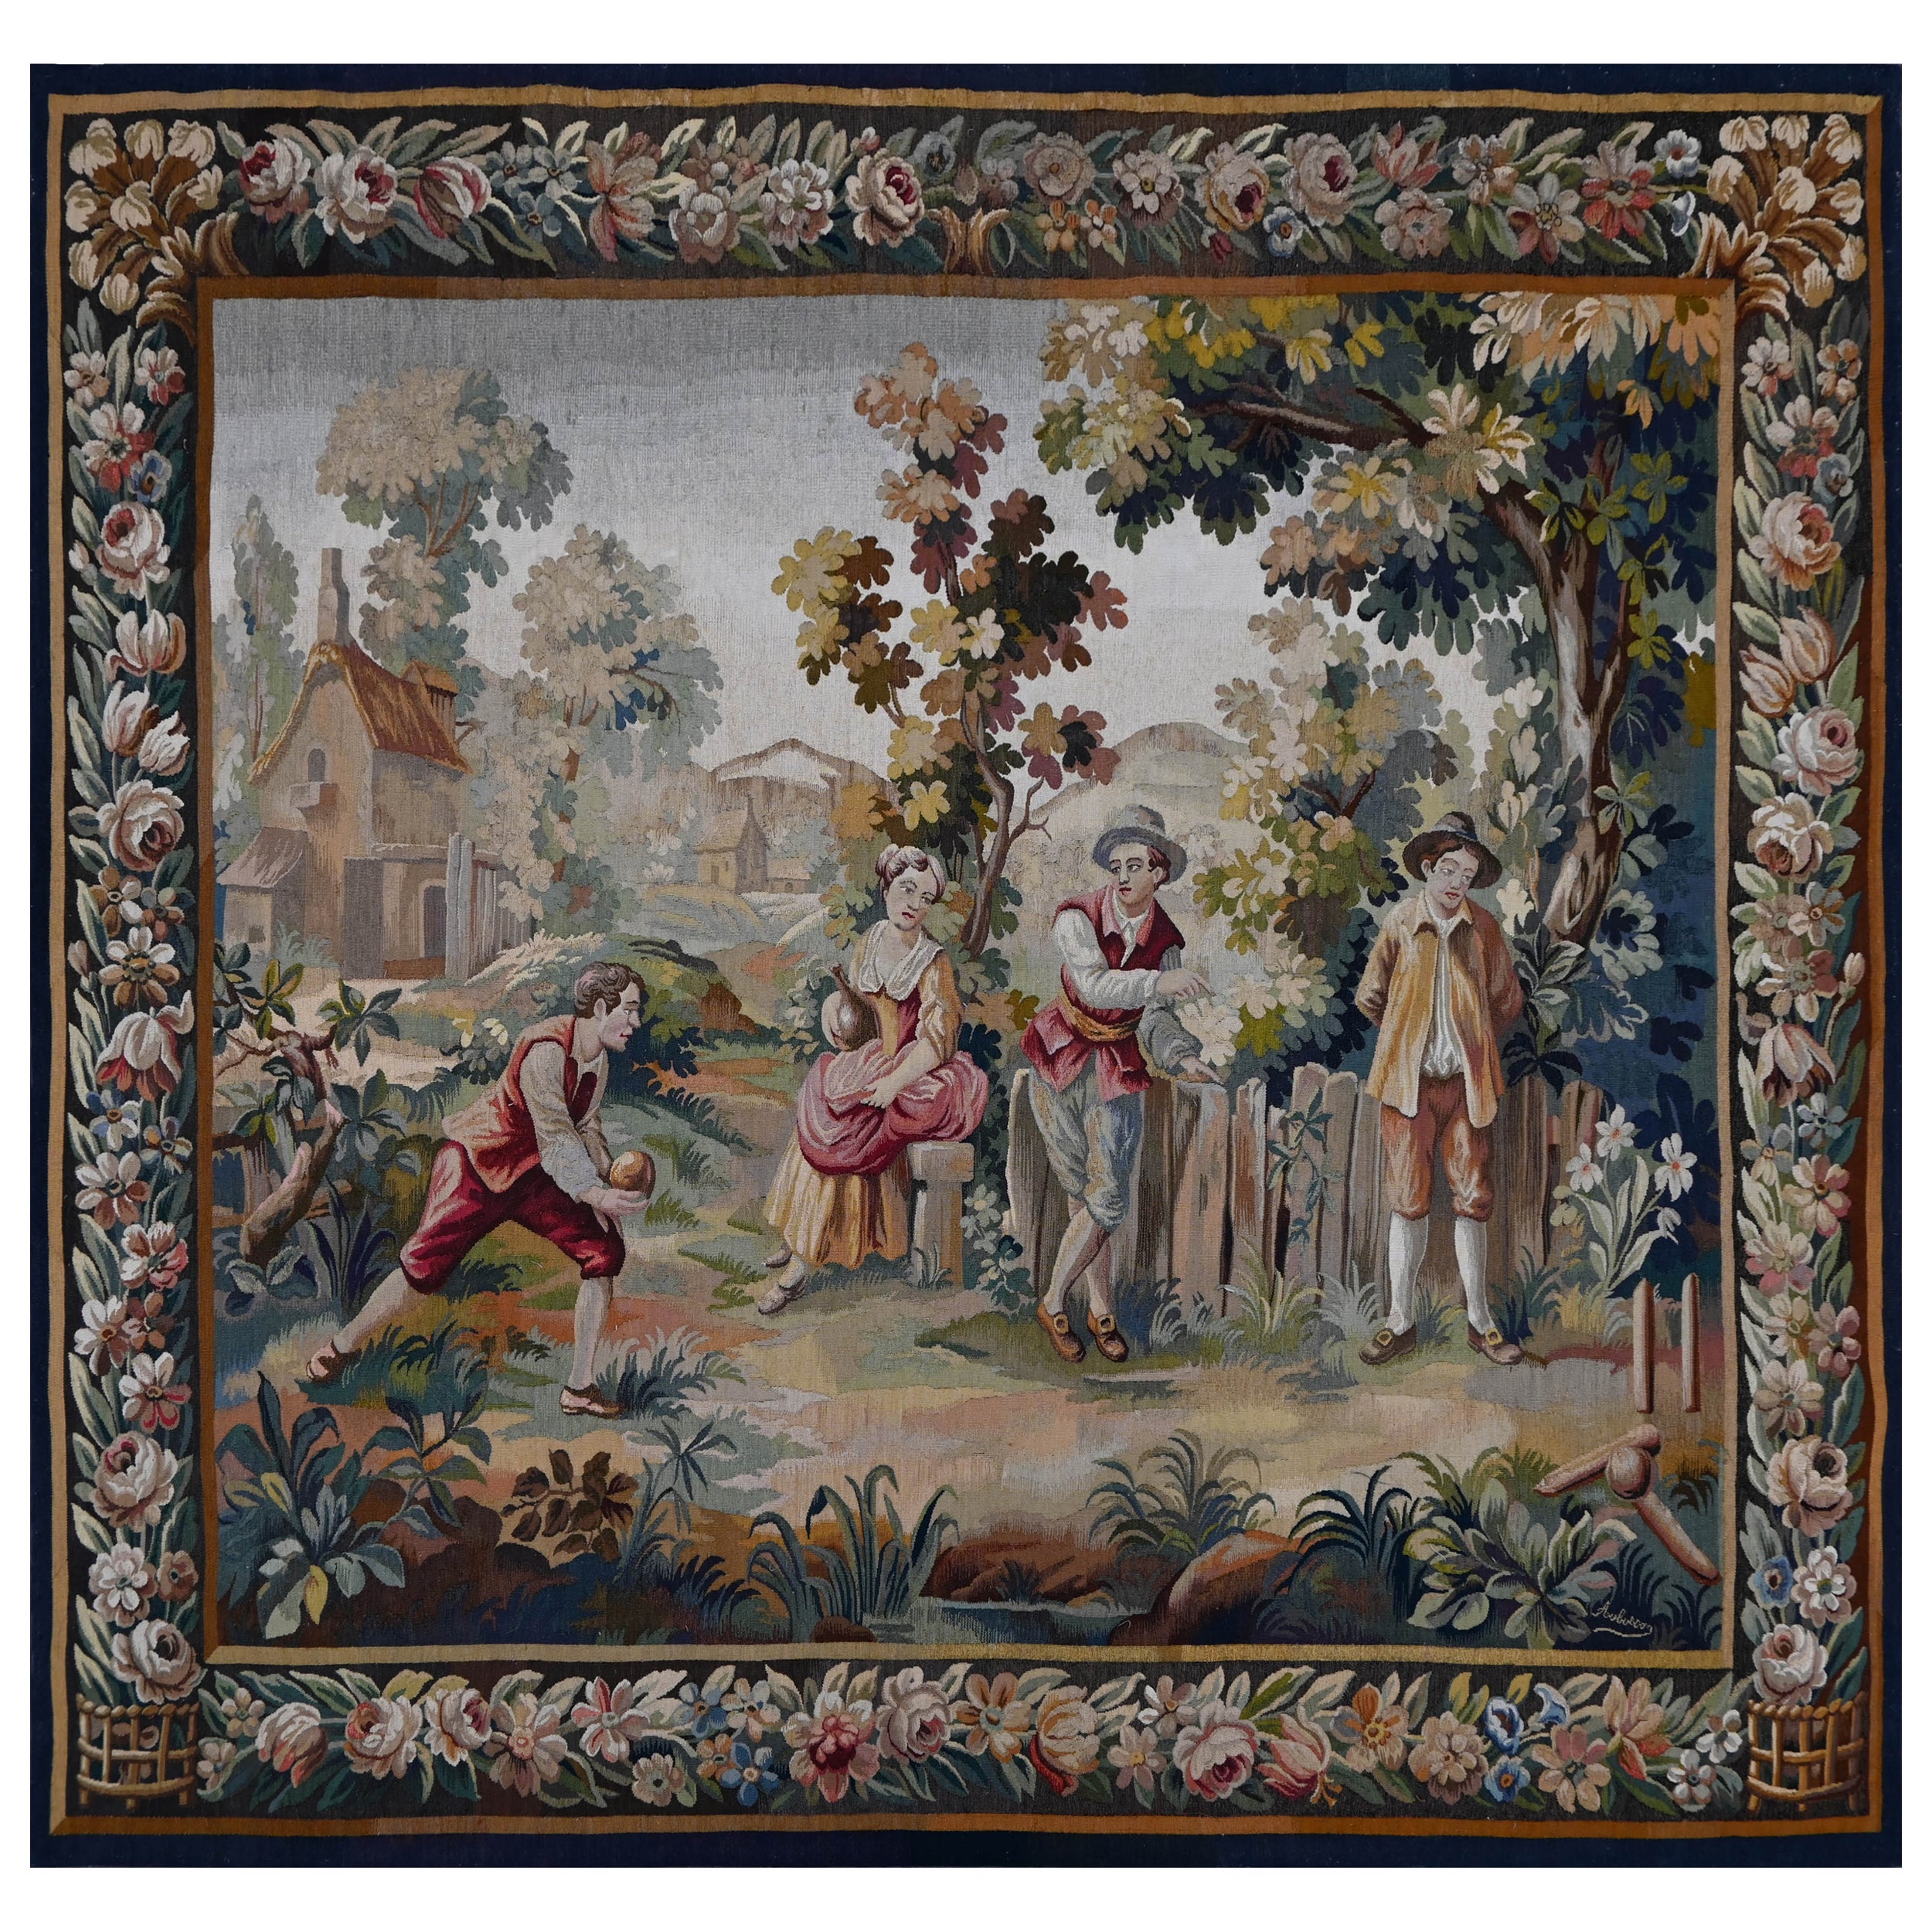 Aubusson tapestry 19th century petanque game scene - N° 1332